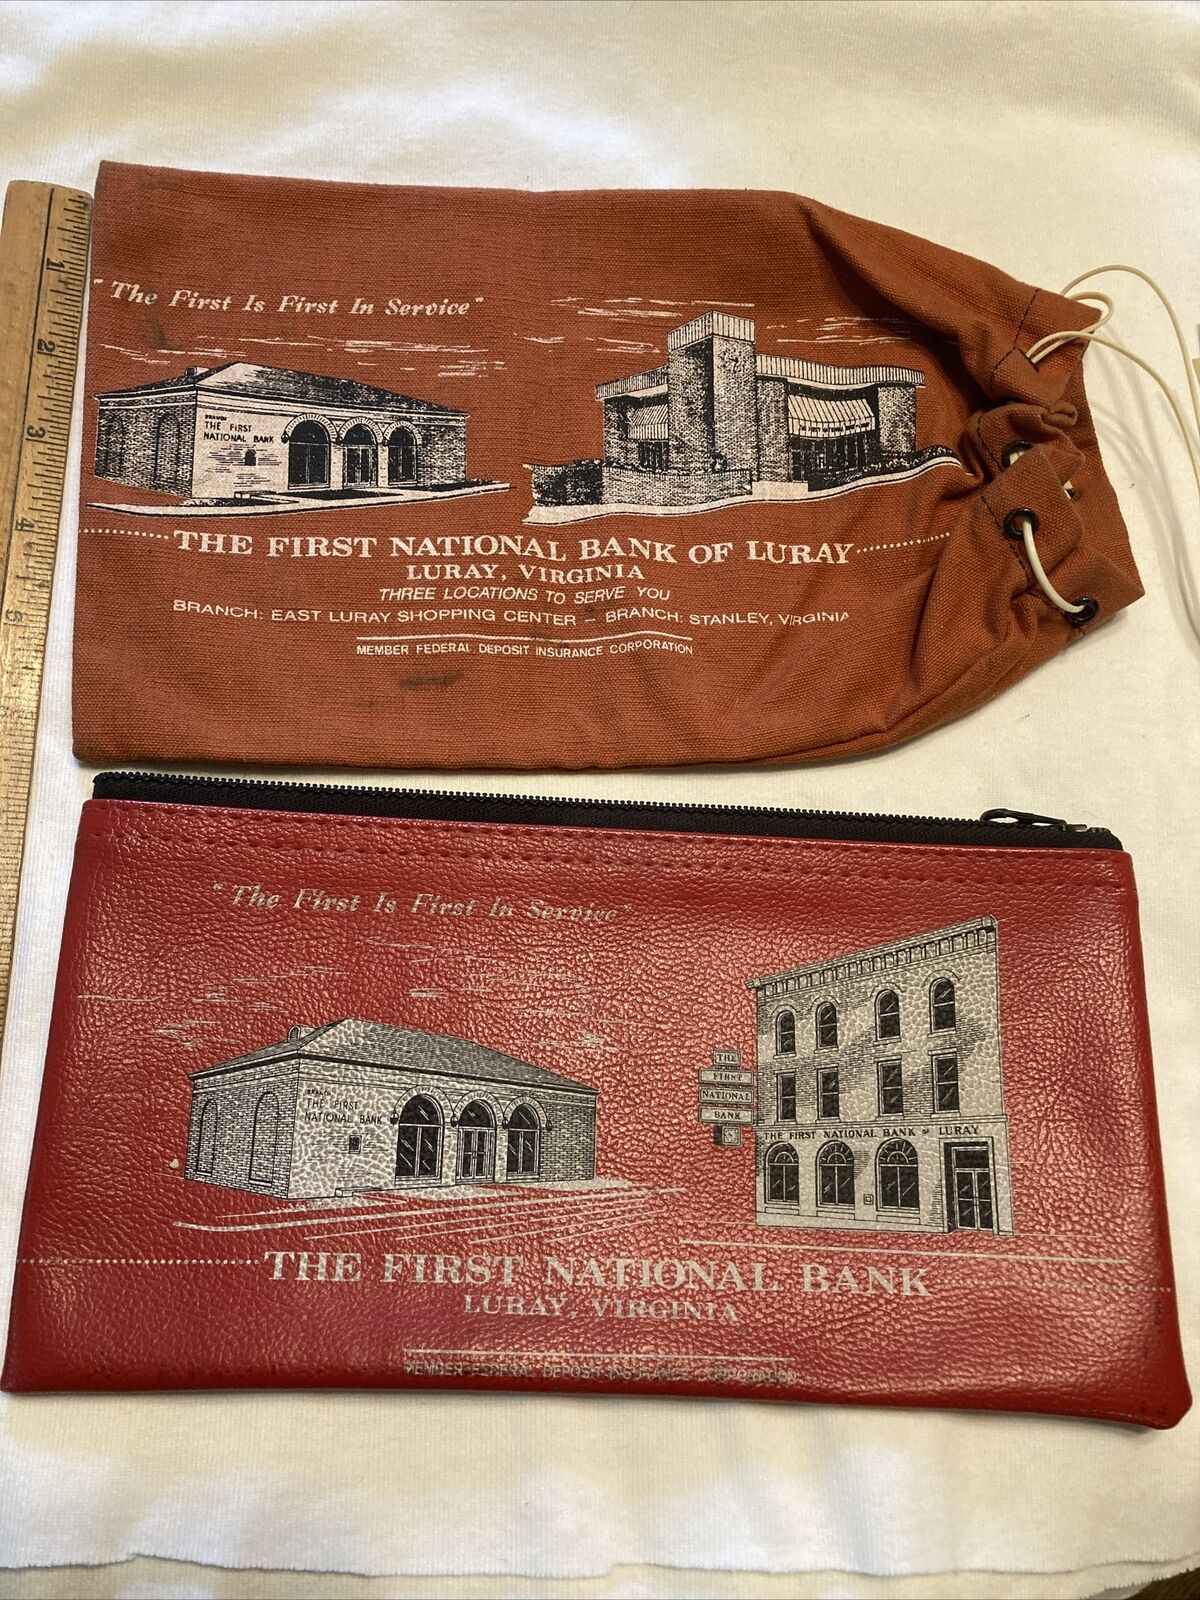 2 Vintage Money Bags From First National Bank Of Luray, Virginia